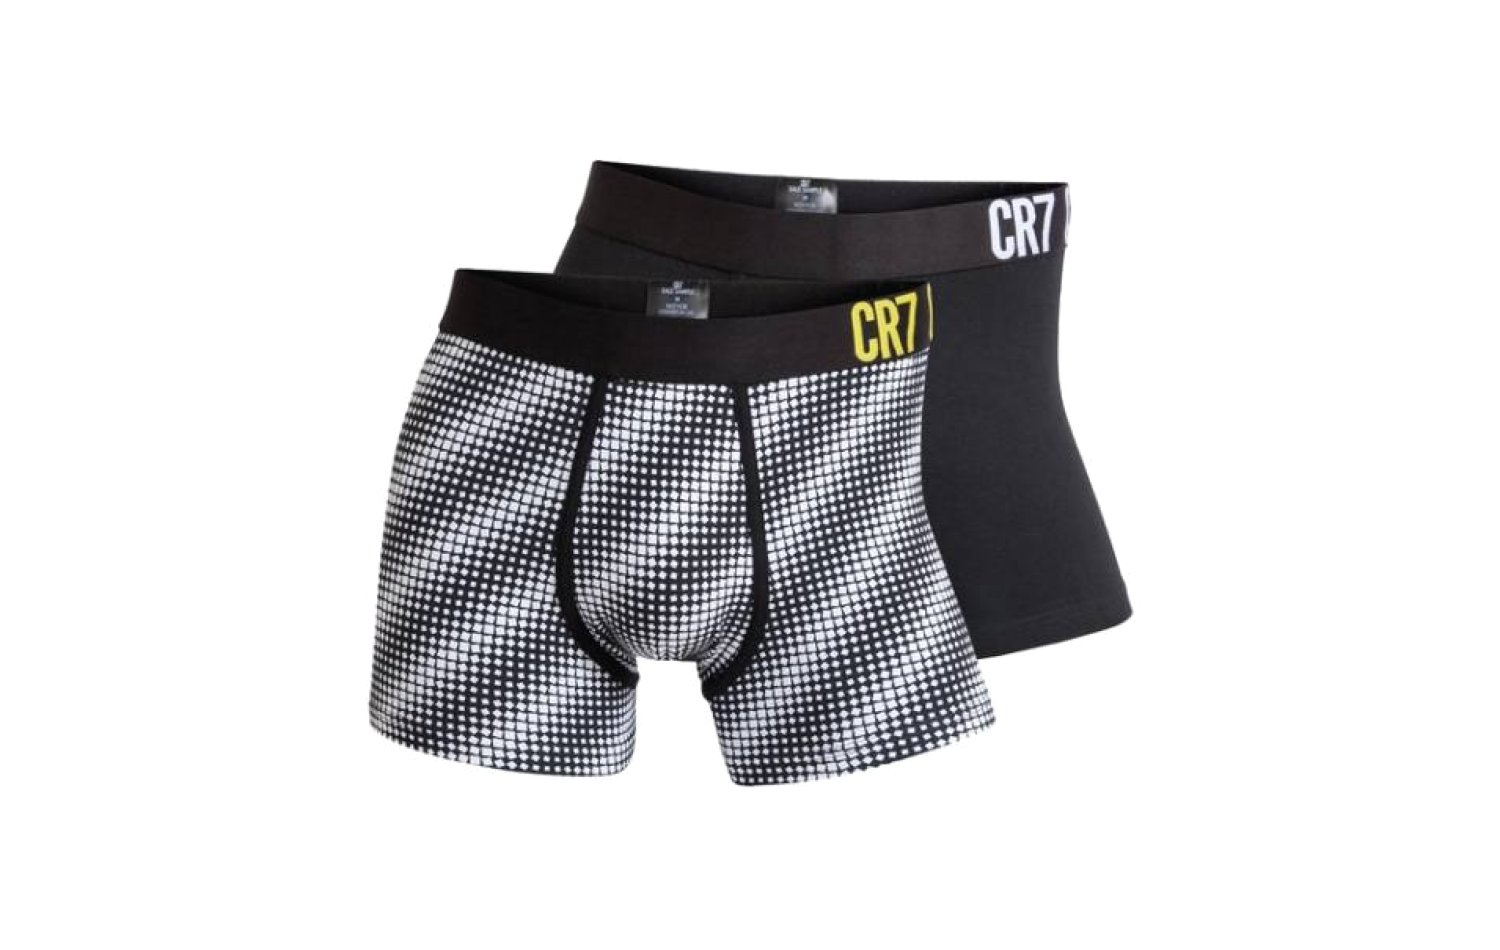 Cr7 Fashion Trunk 2-pack (8302-49-521)